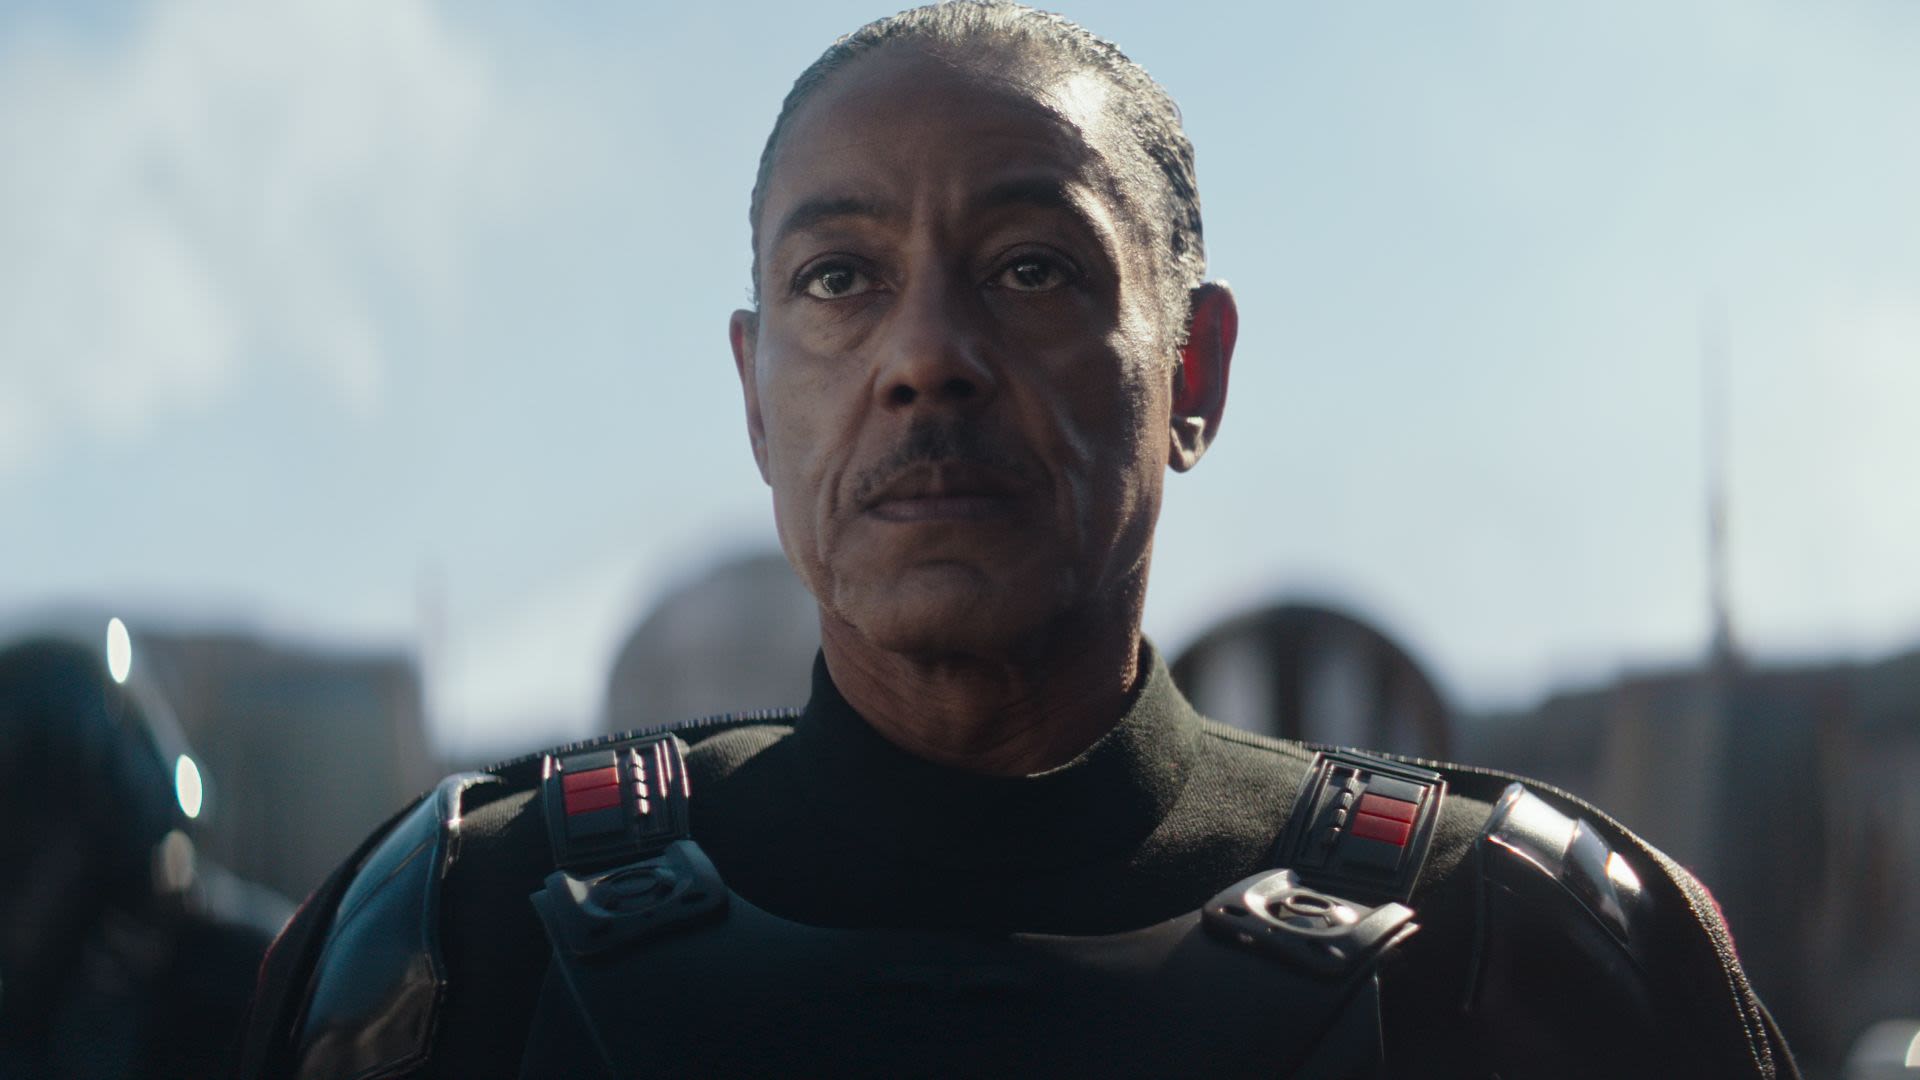 Following his MCU casting, Giancarlo Esposito has his say on the one character fans kept linking him with